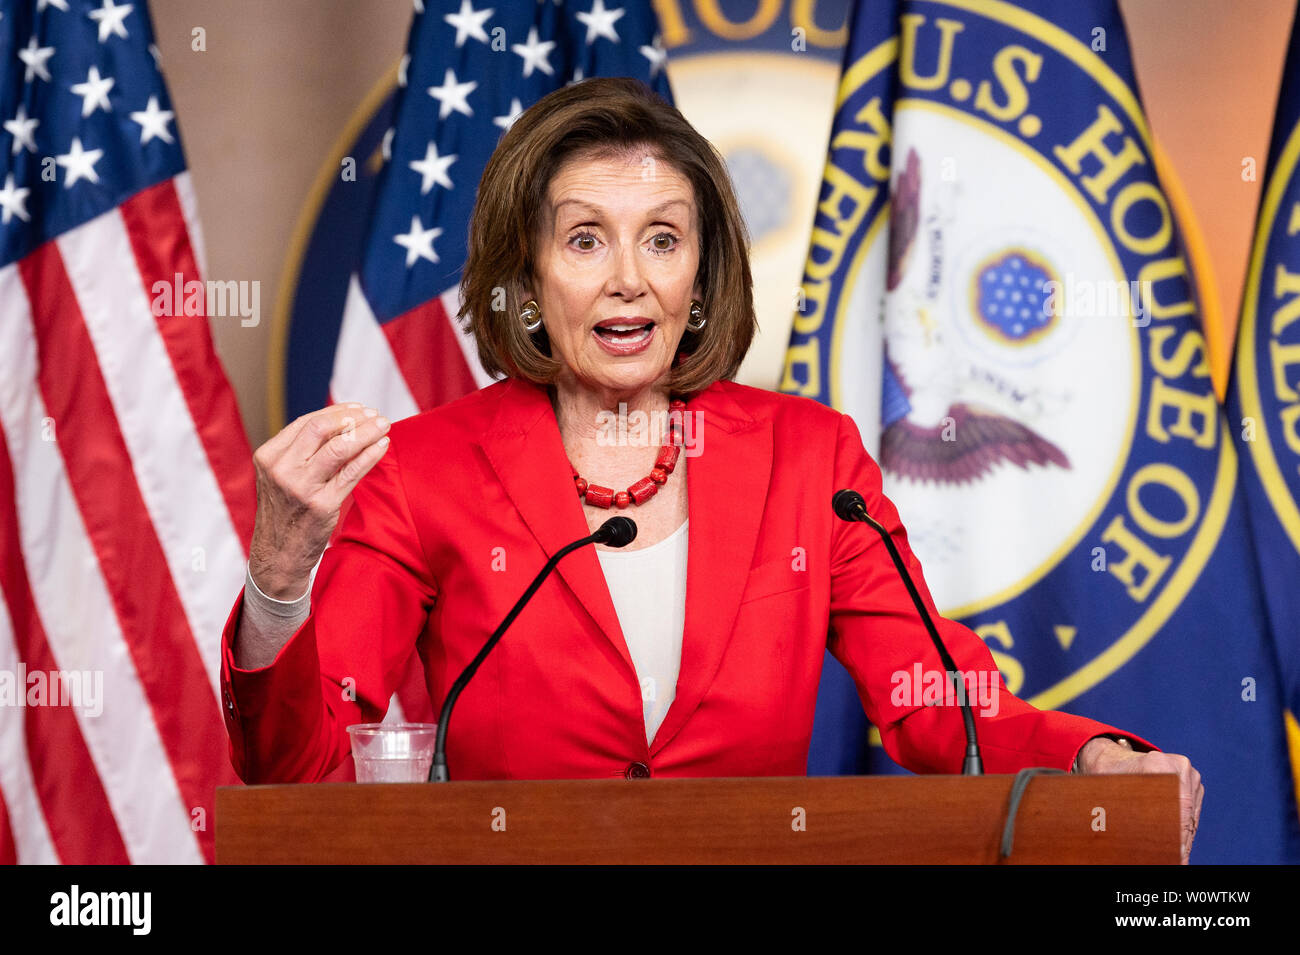 Washington, United States. 27th June, 2019. House Speaker Nancy Pelosi (D-CA) speaking at her weekly press conference at the US Capitol in Washington, DC. Credit: SOPA Images Limited/Alamy Live News Stock Photo